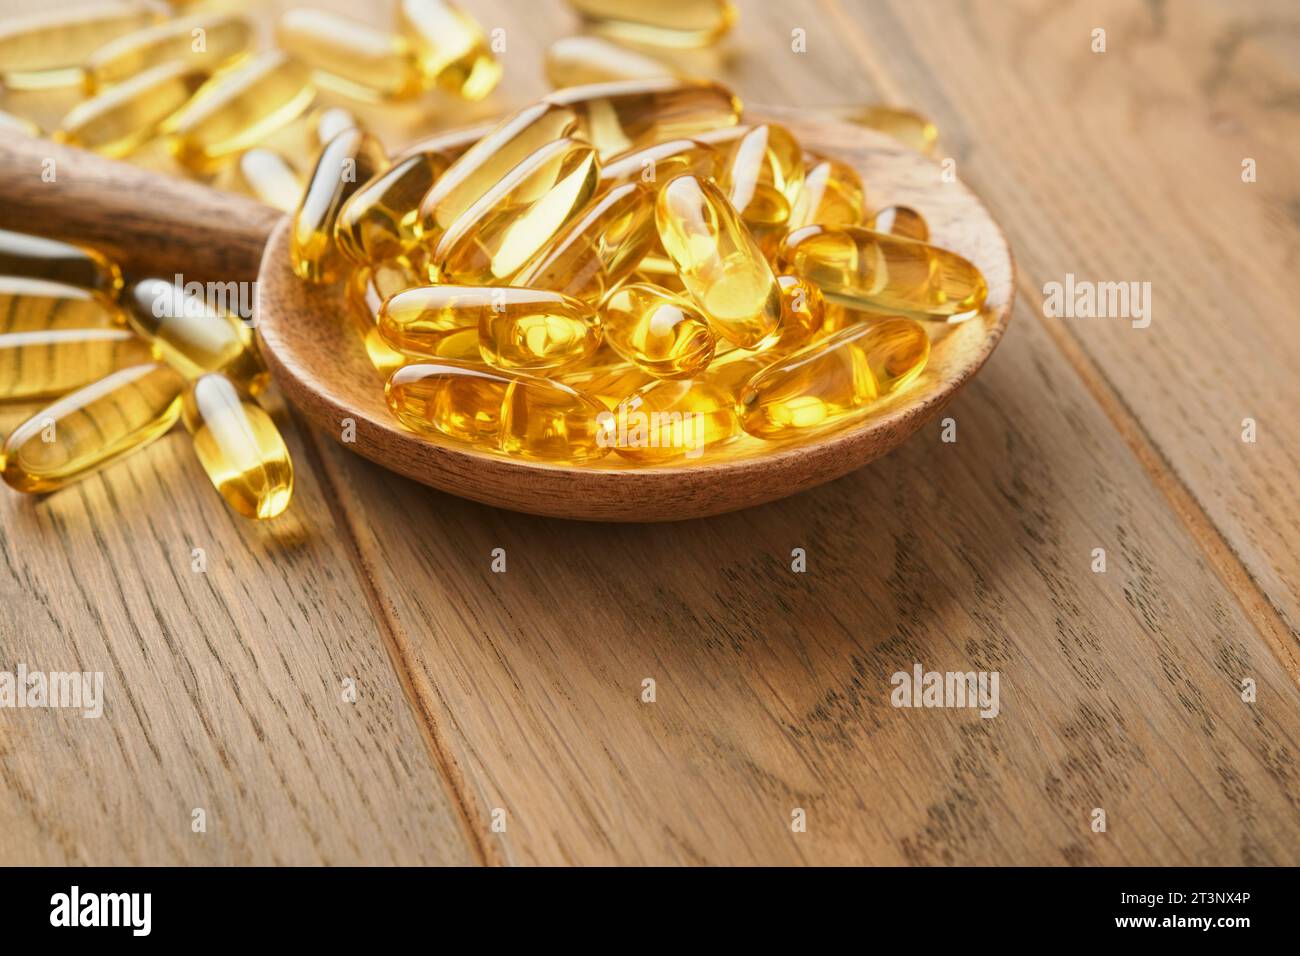 Close up capsules with Vitamin D, E or Omega 3,6,9 fatty acids in bottle on old wooden backgrounds. Food supplement oil filled fish oil. Natural suppl Stock Photo